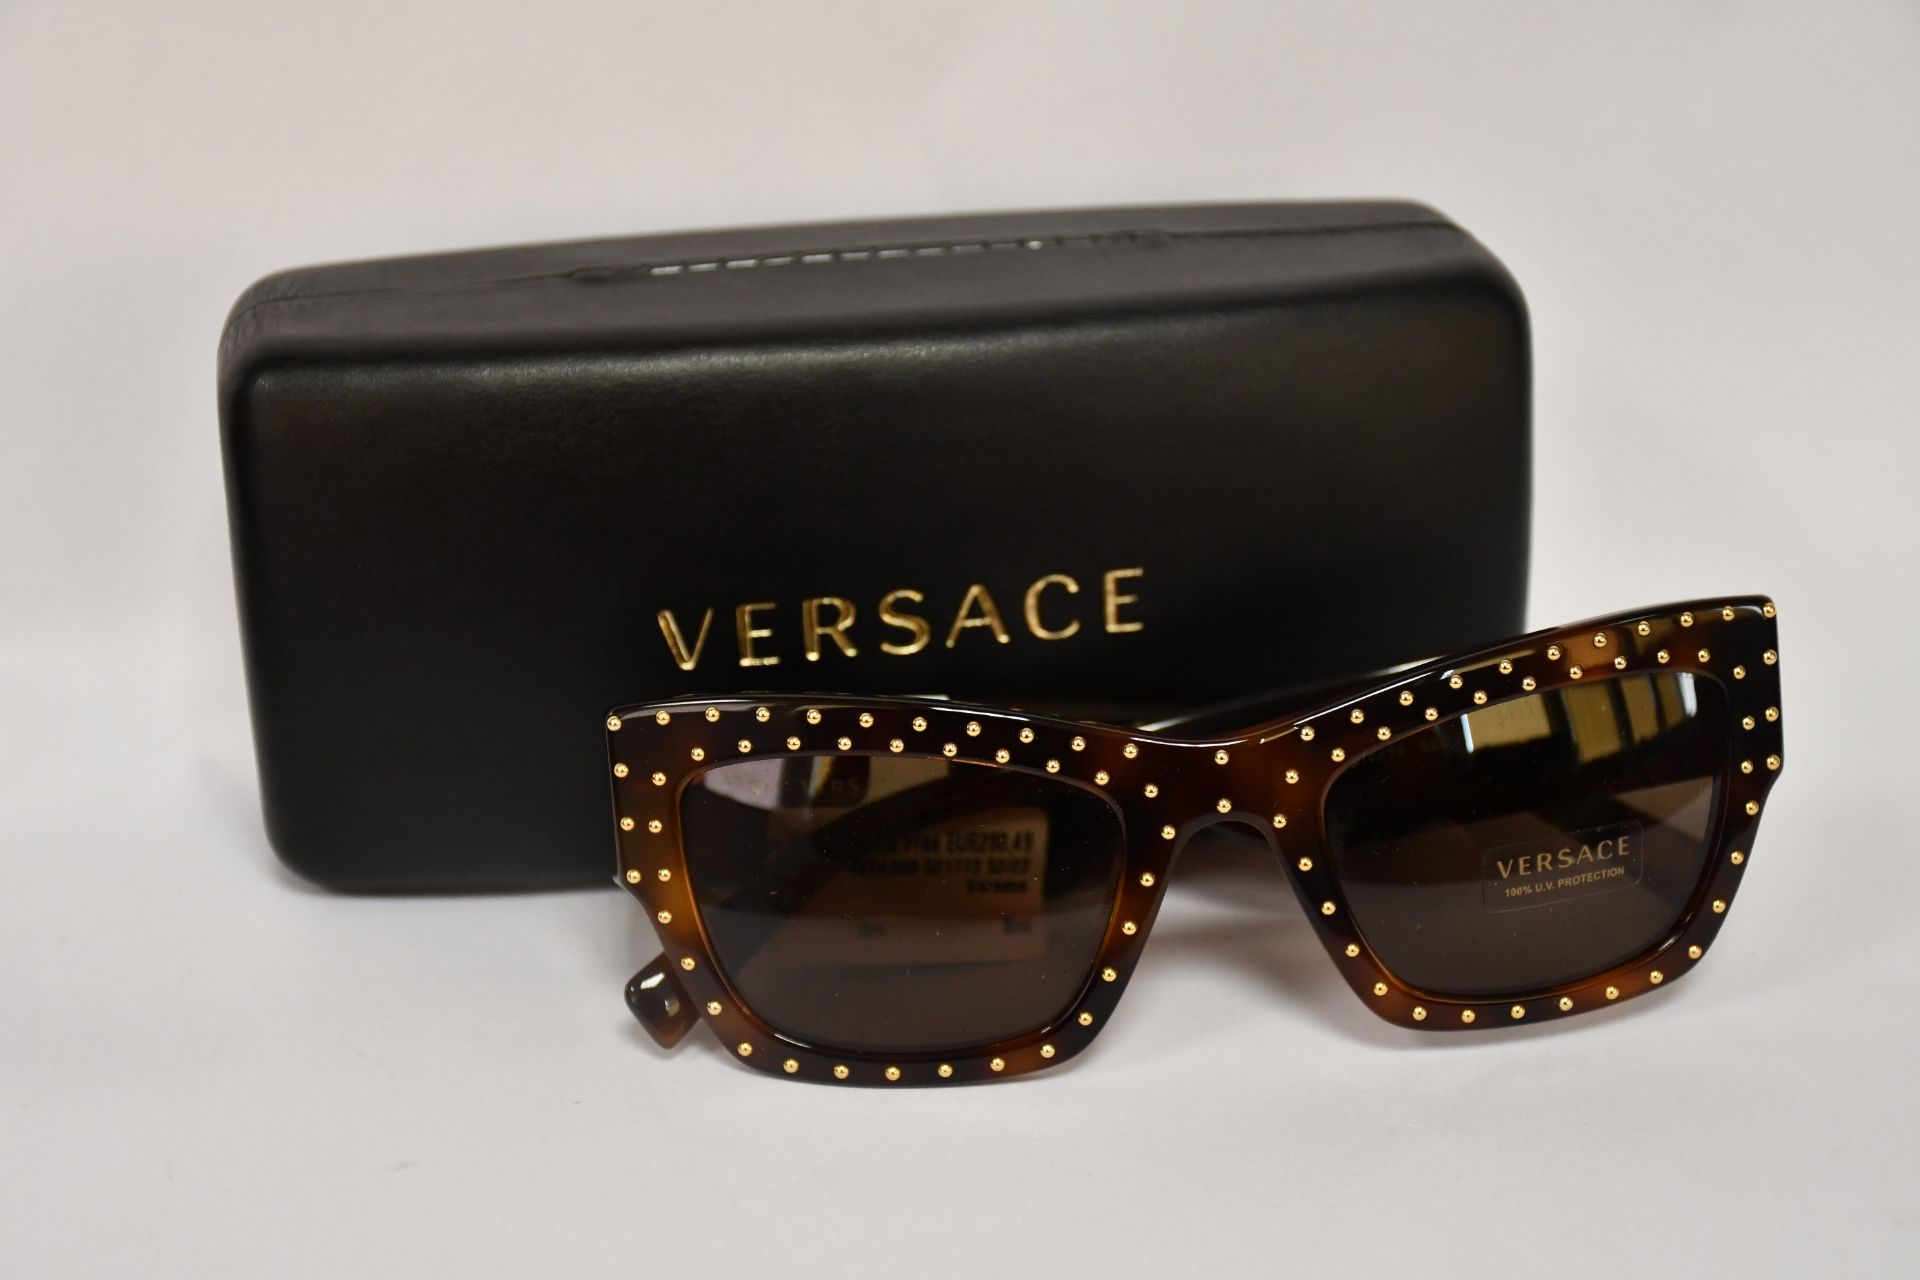 A pair of as new Versace VE 2161B sunglasses (RRP £150).